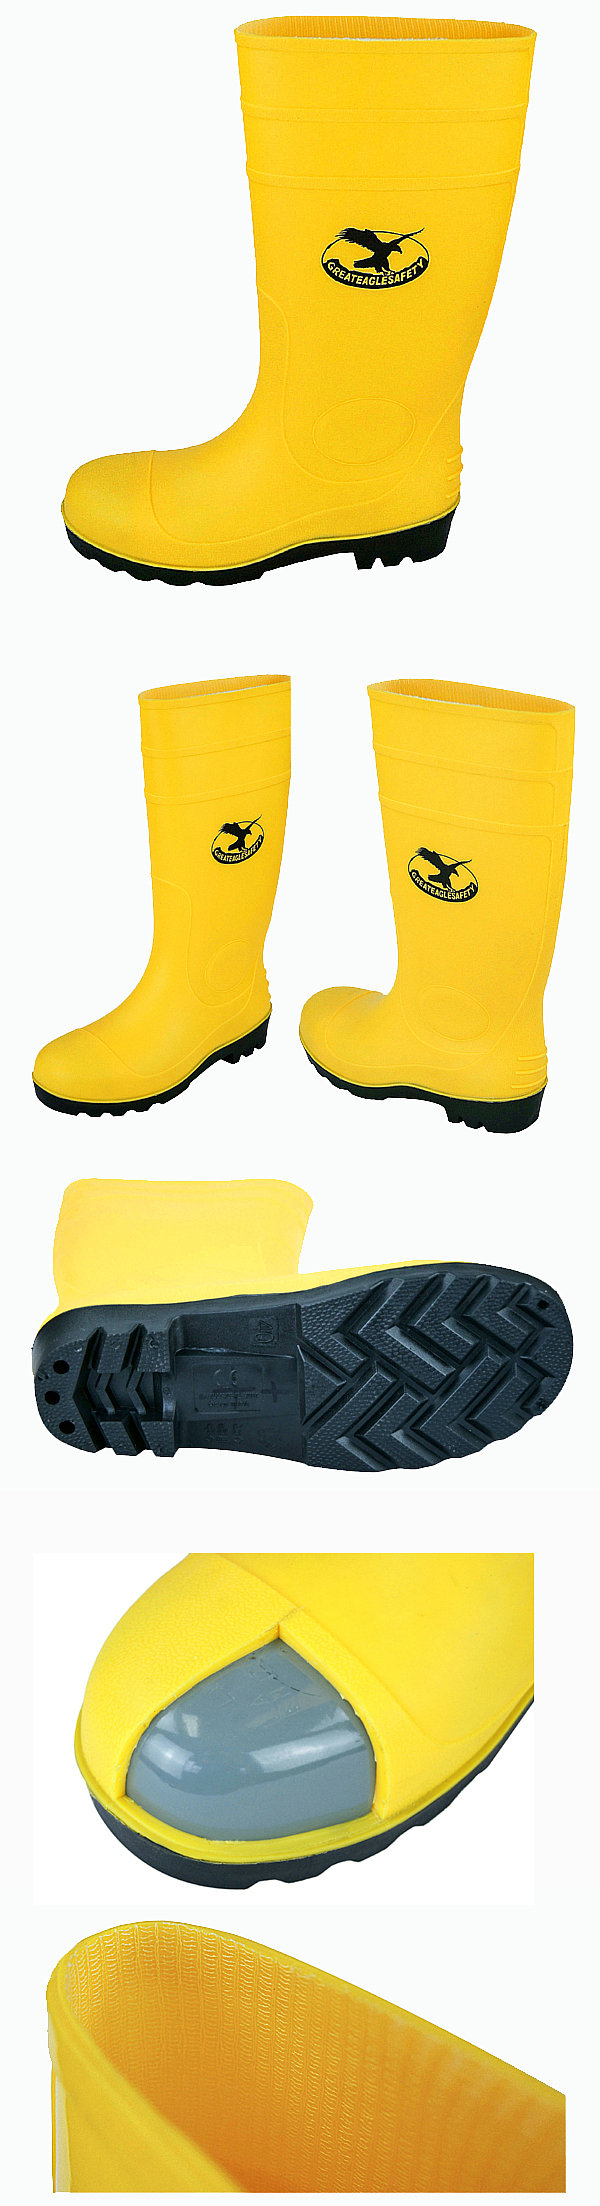 Steel Pvc Safety Gumboots